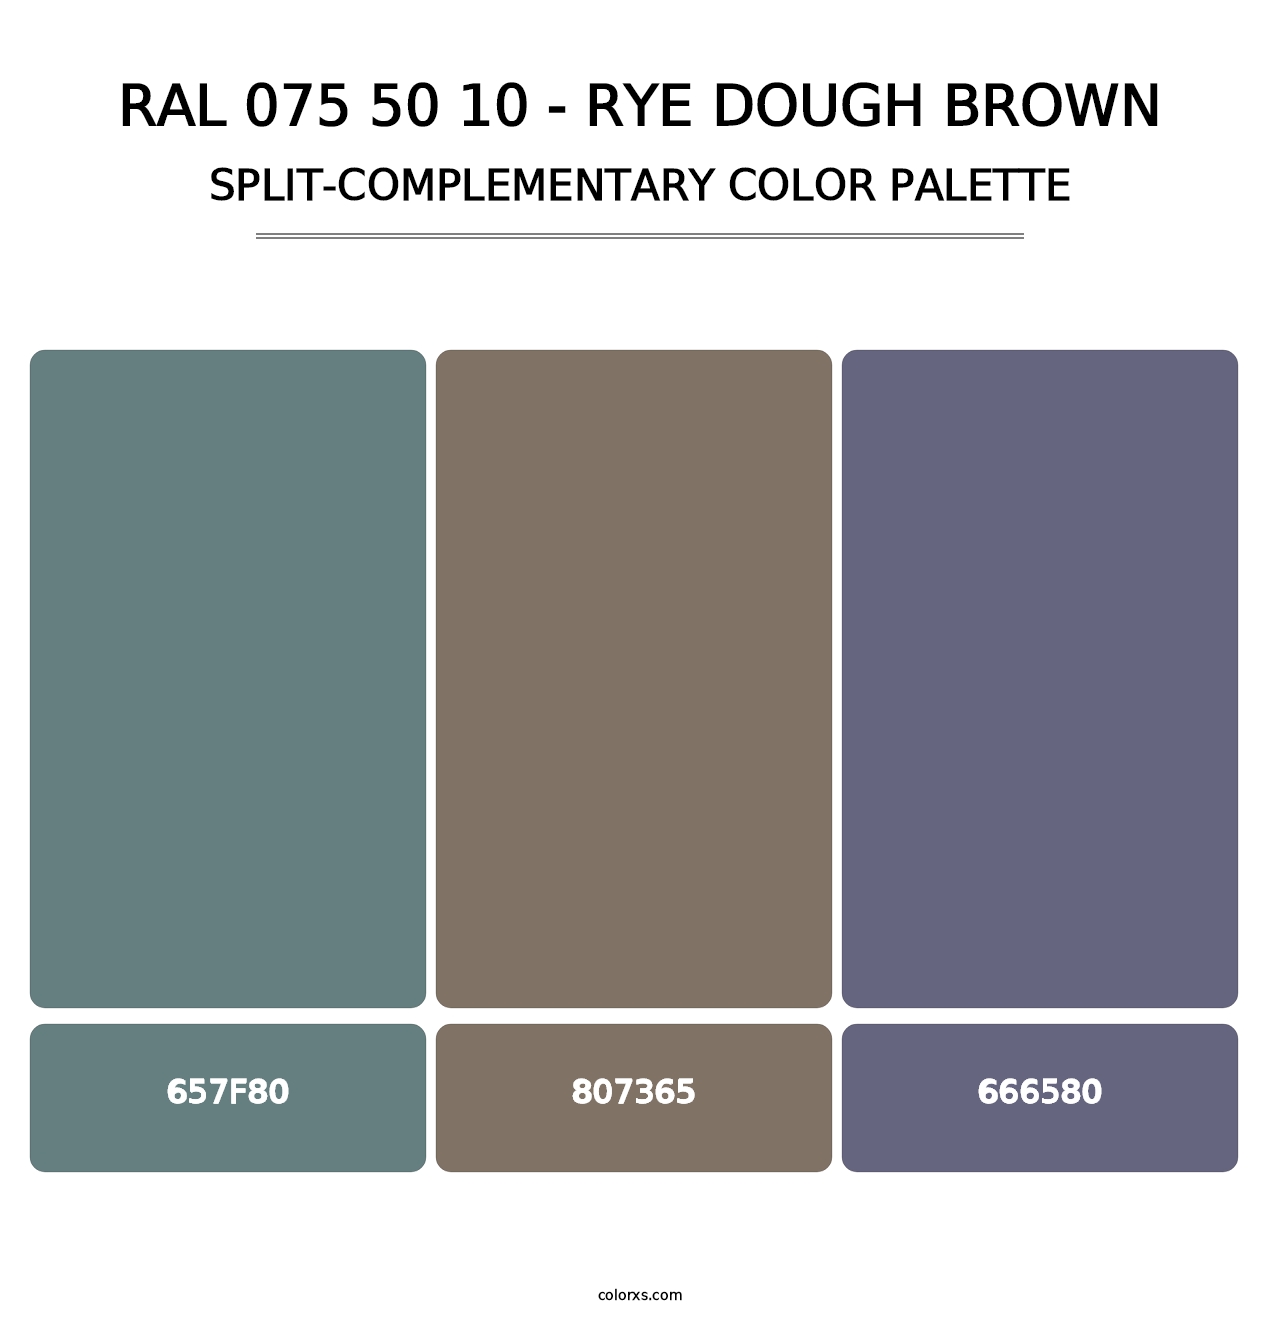 RAL 075 50 10 - Rye Dough Brown - Split-Complementary Color Palette